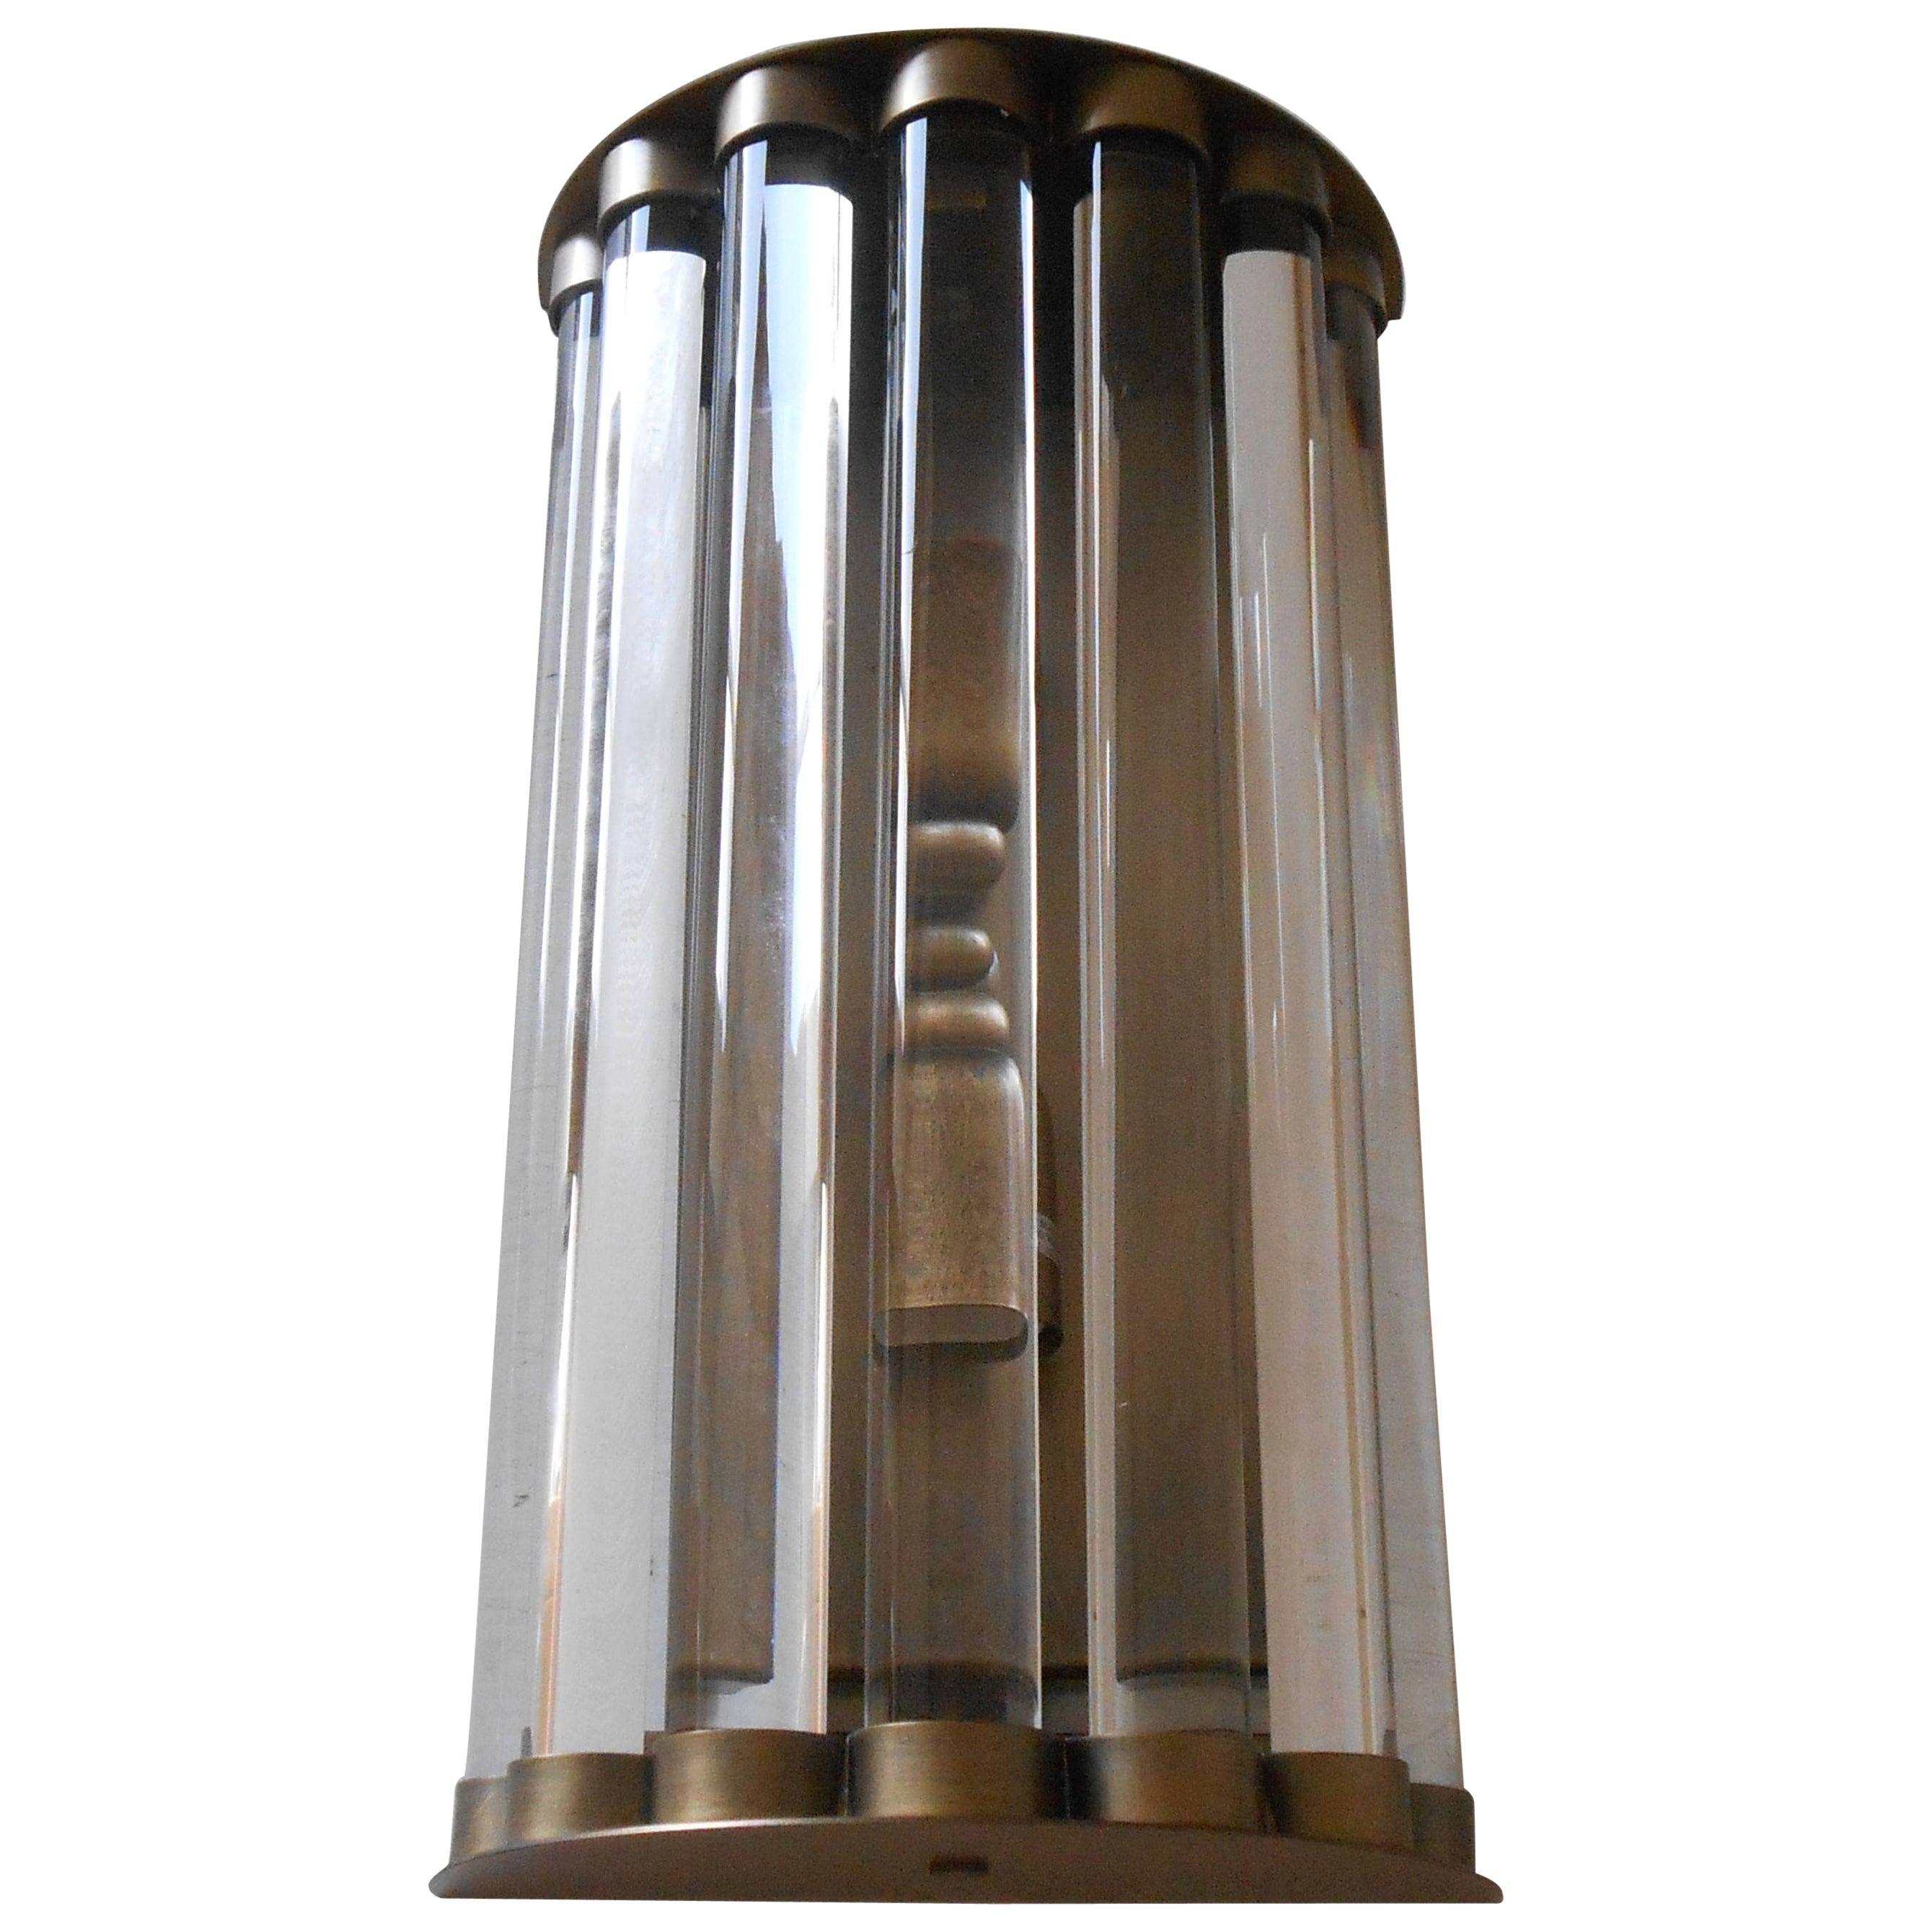 Italian wall light or flushmount with crystal bars mounted on bronzed metal finish / Designed by Fabio Bergomi for Fabio Ltd / Made in Italy.
2 lights / E12 or E14 type / max 40W each
Measures: Height 14 inches, width 8 inches, depth 4 inches 
Order